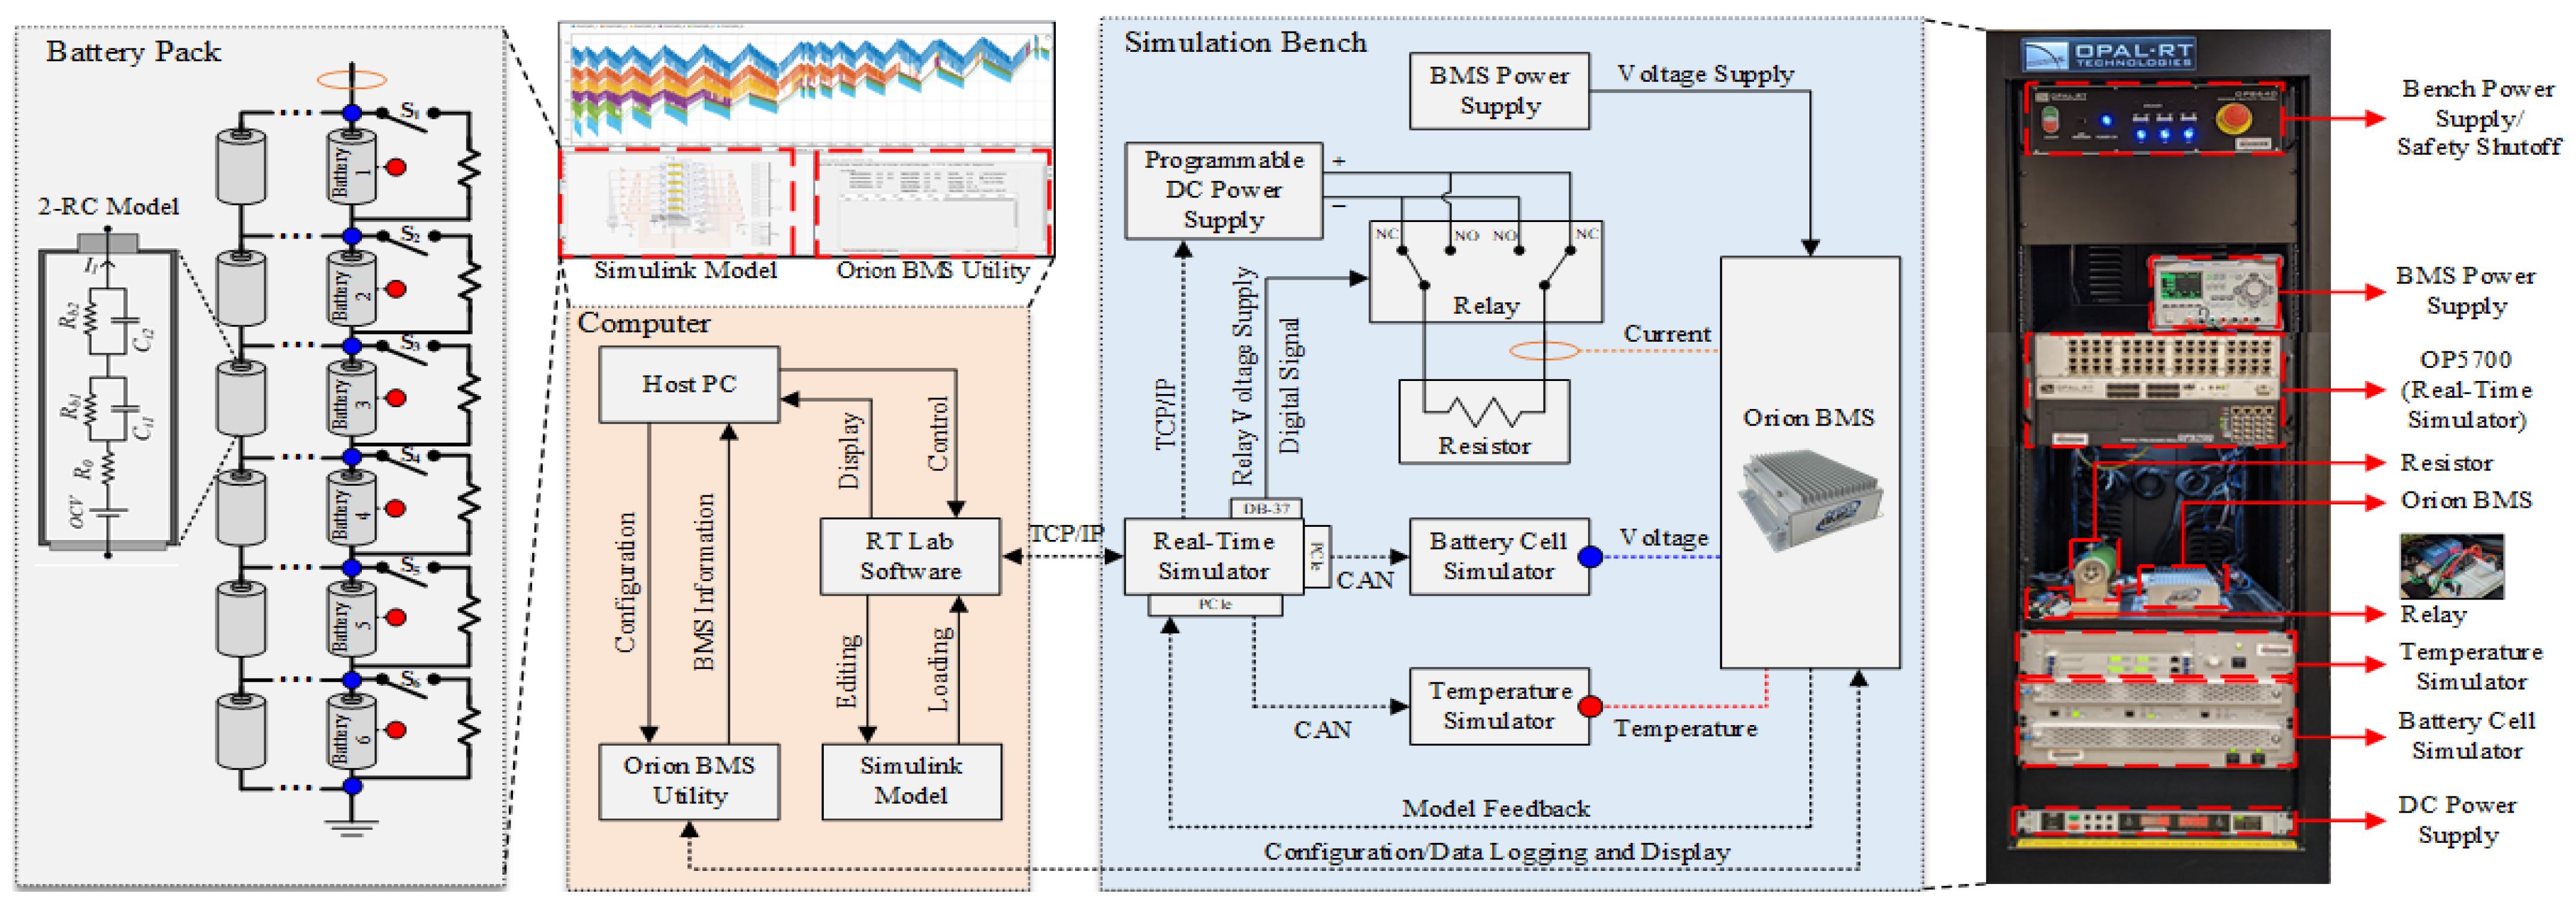 Energies | Free Full-Text | Performance Analysis of Commercial Passive Balancing  Battery Management System Operation Using a Hardware-in-the-Loop Testbed